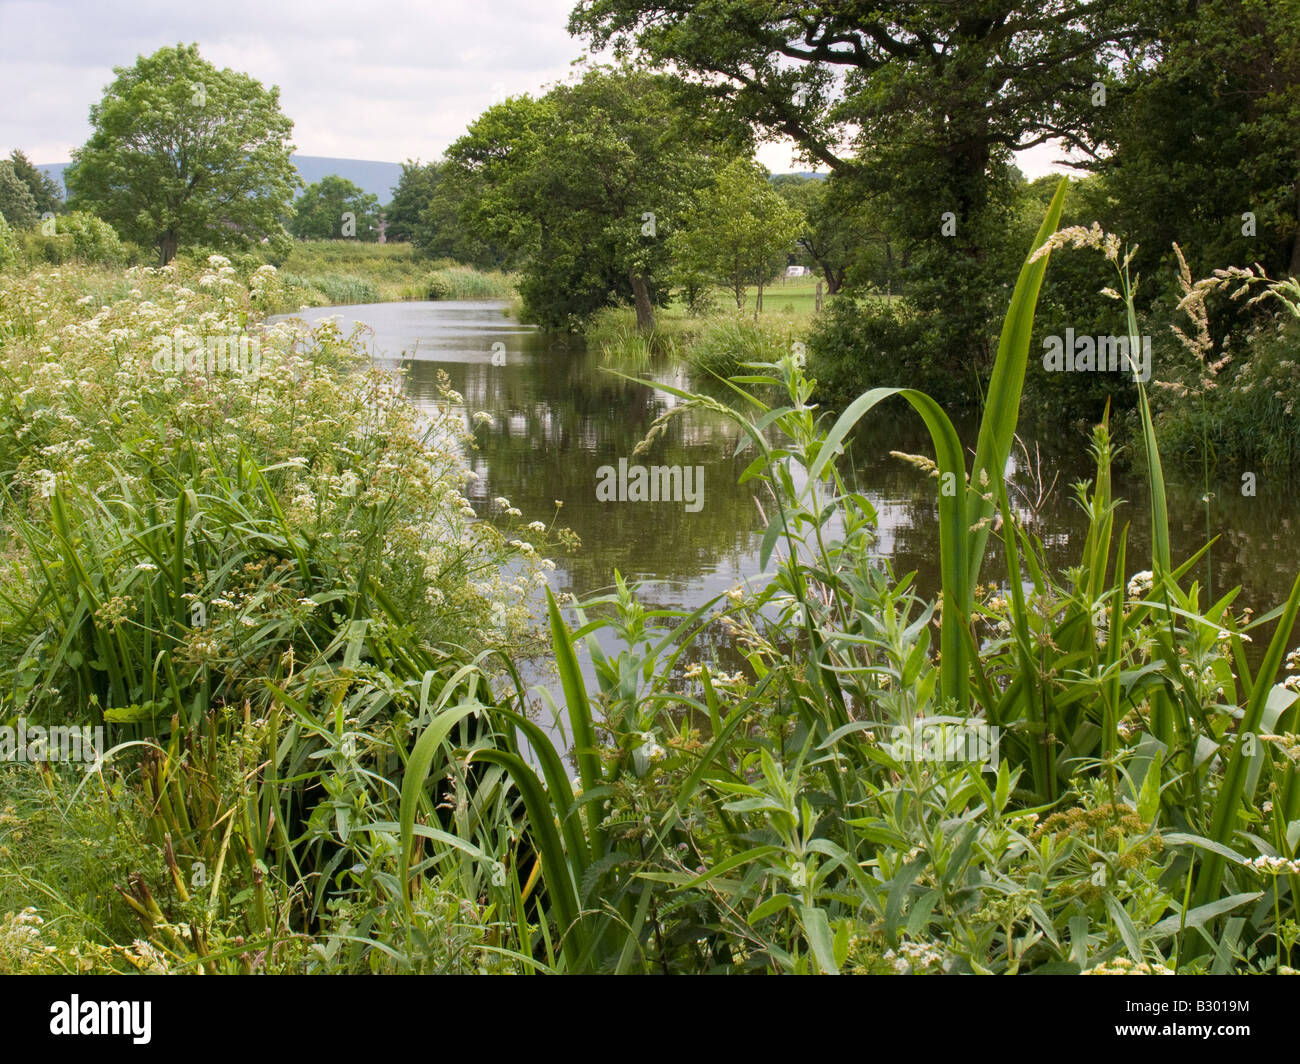 native vegetation, grass, reeds and bulrushes growing alongside lancaster canal Stock Photo